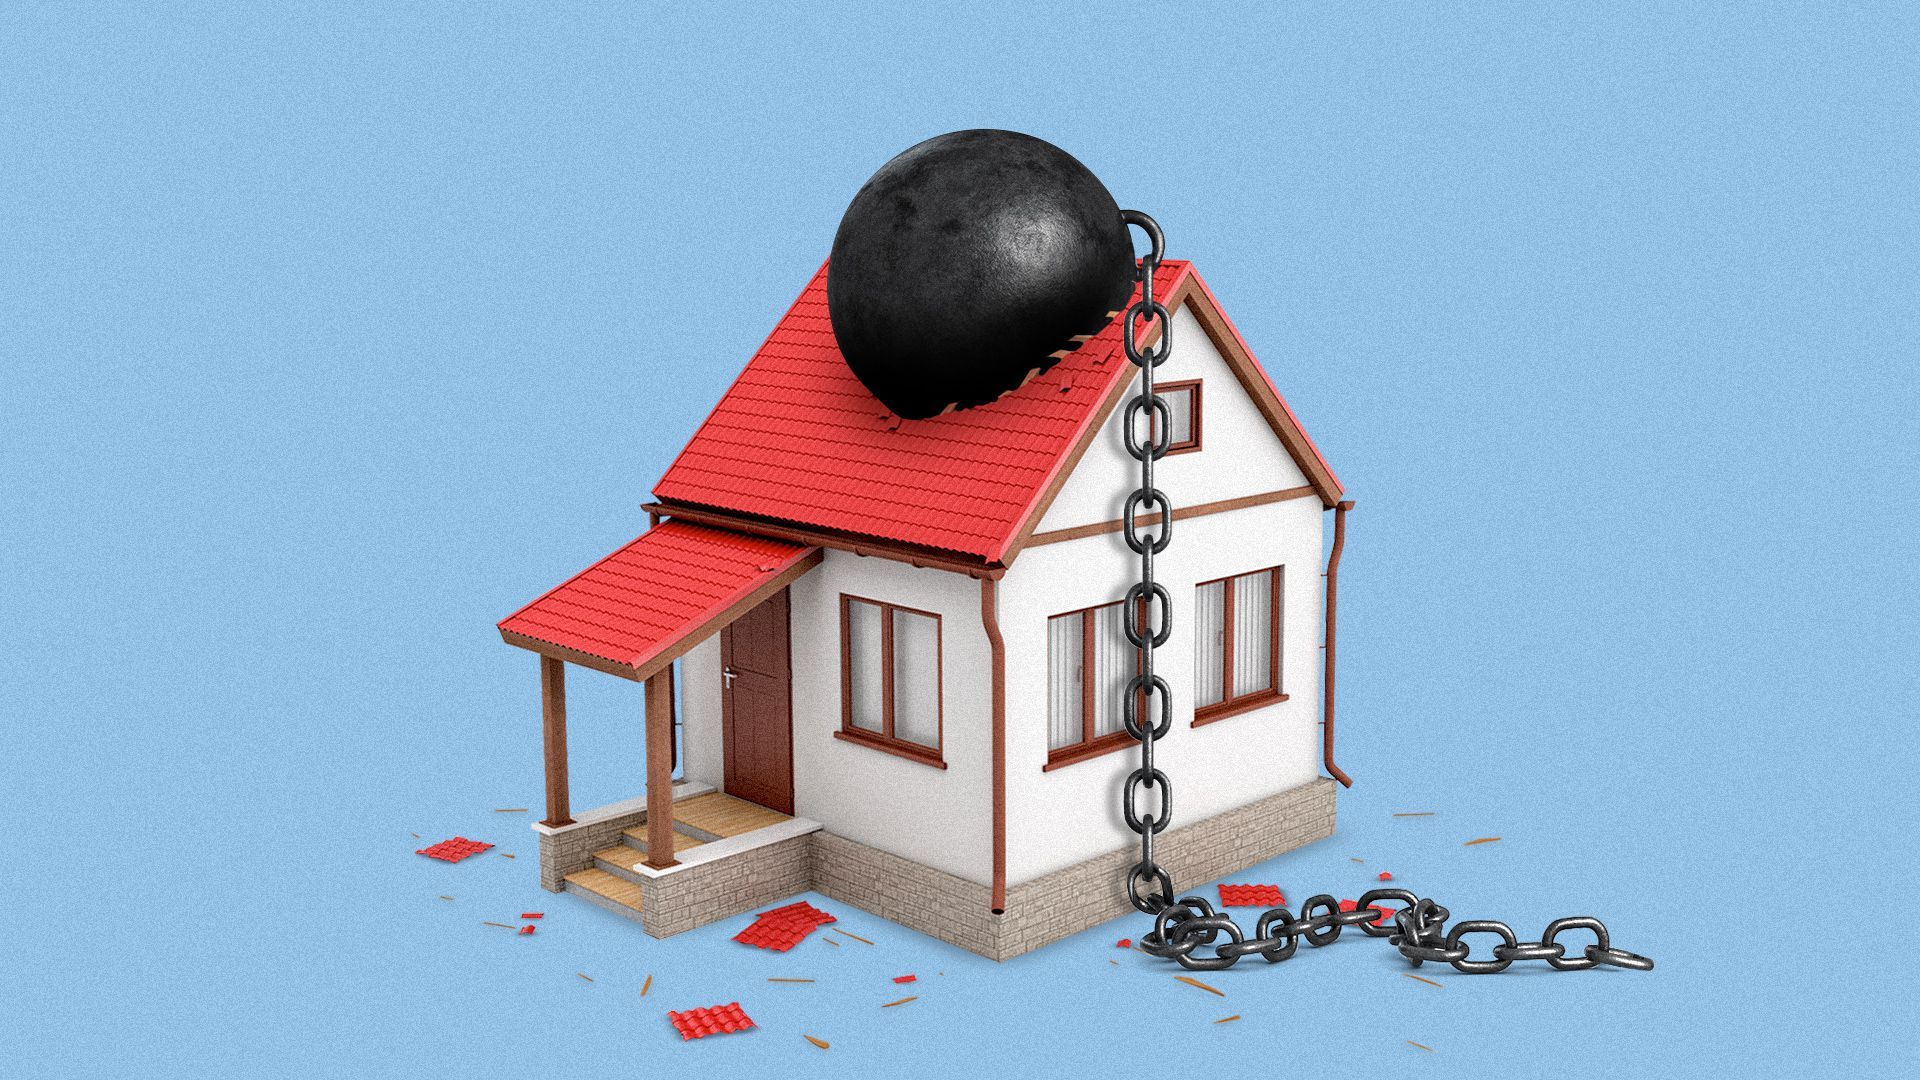 Illustration of a ball and chain crashing into the roof of a house.  